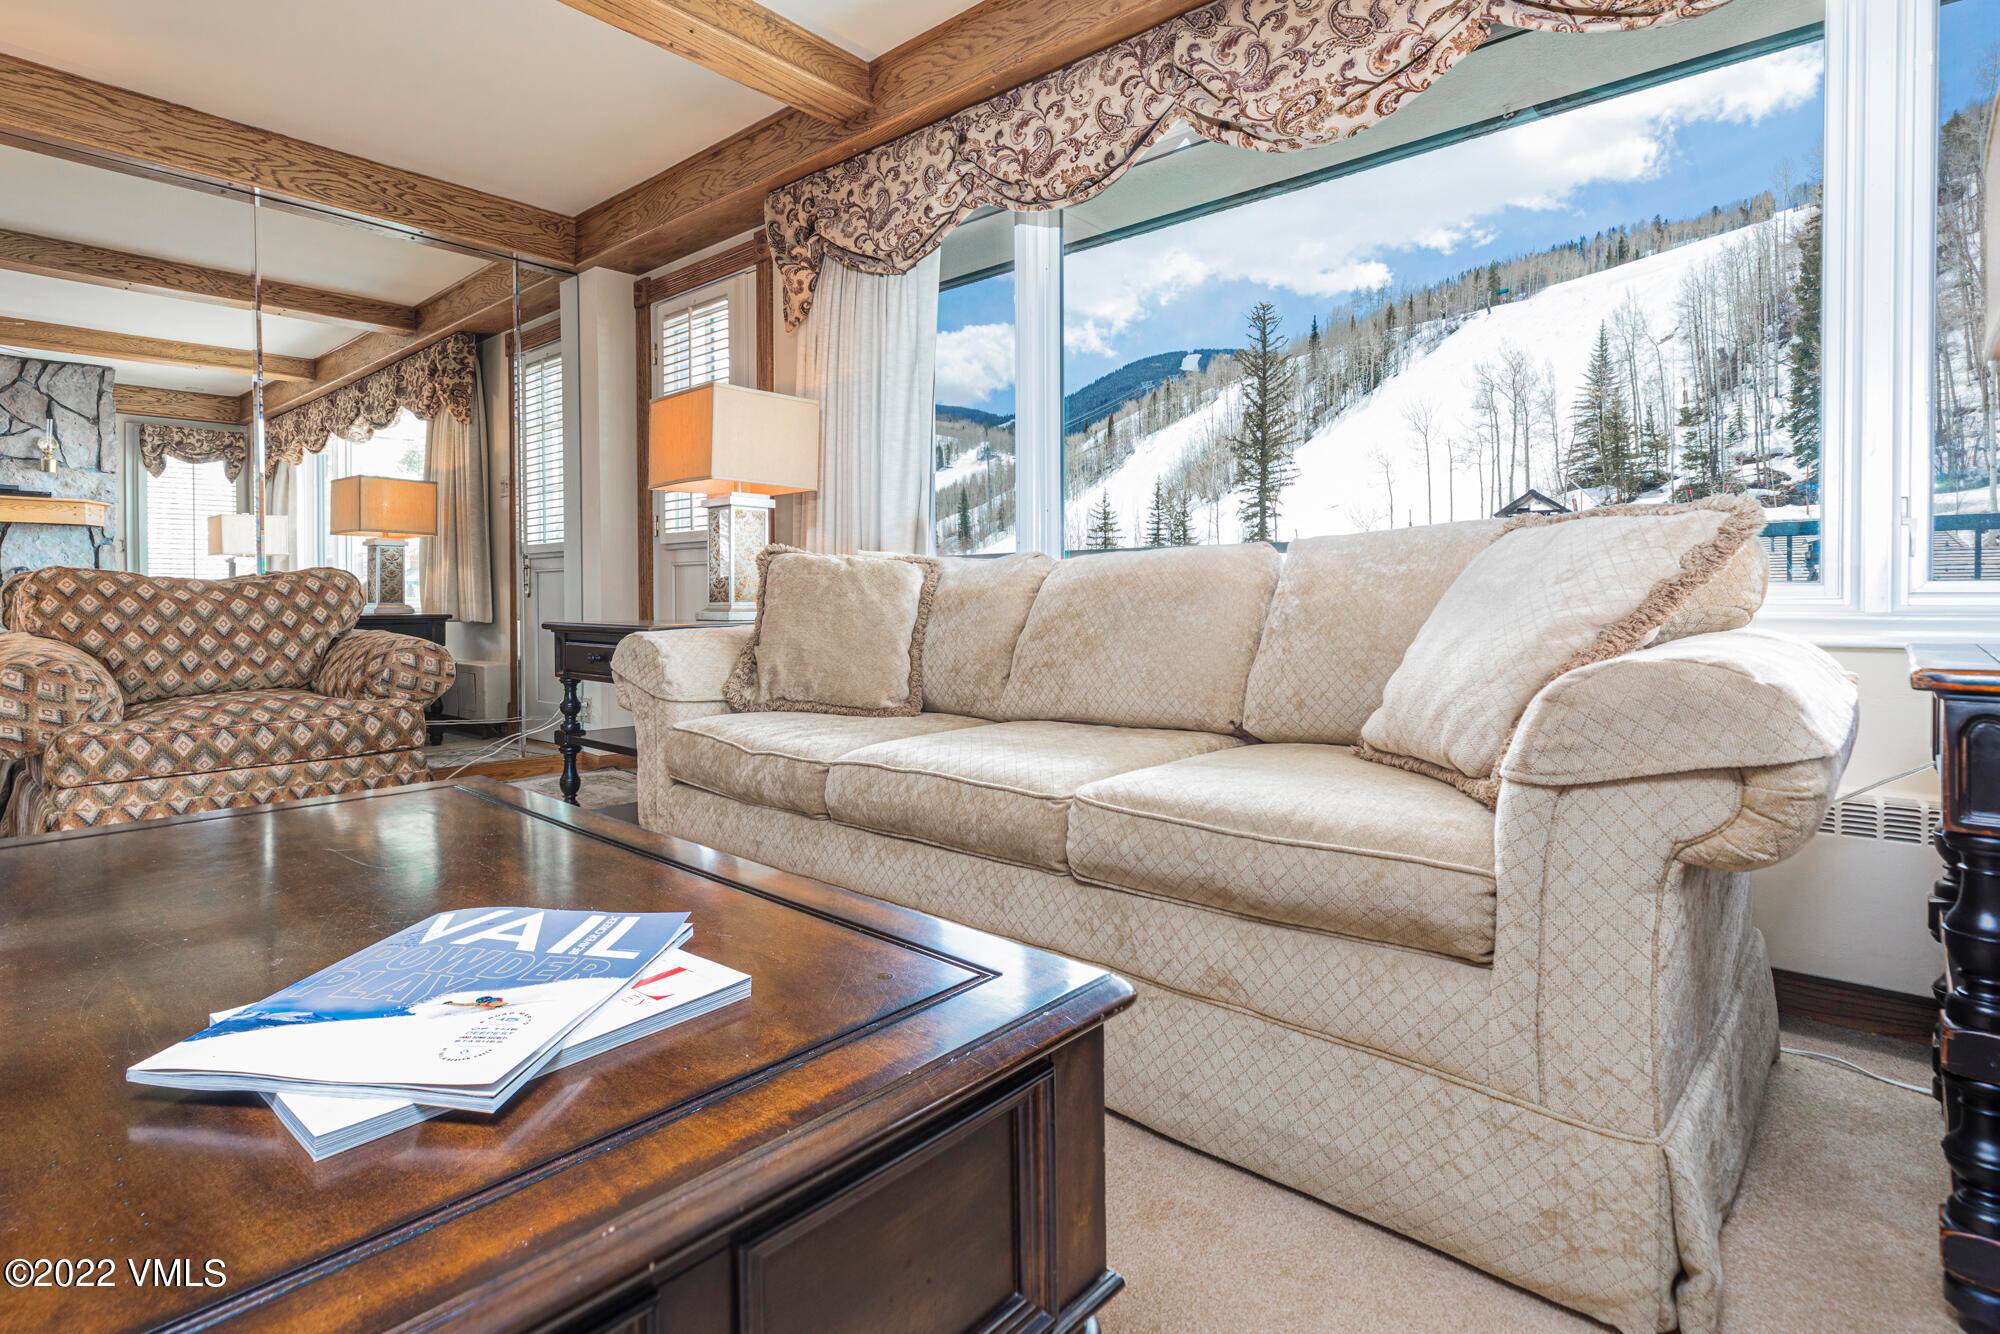 One of the best locations in Vail Village, this south facing three bedroom, three bathroom looks directly upon Vail mountain with an abundance of sunlight throughout the day.